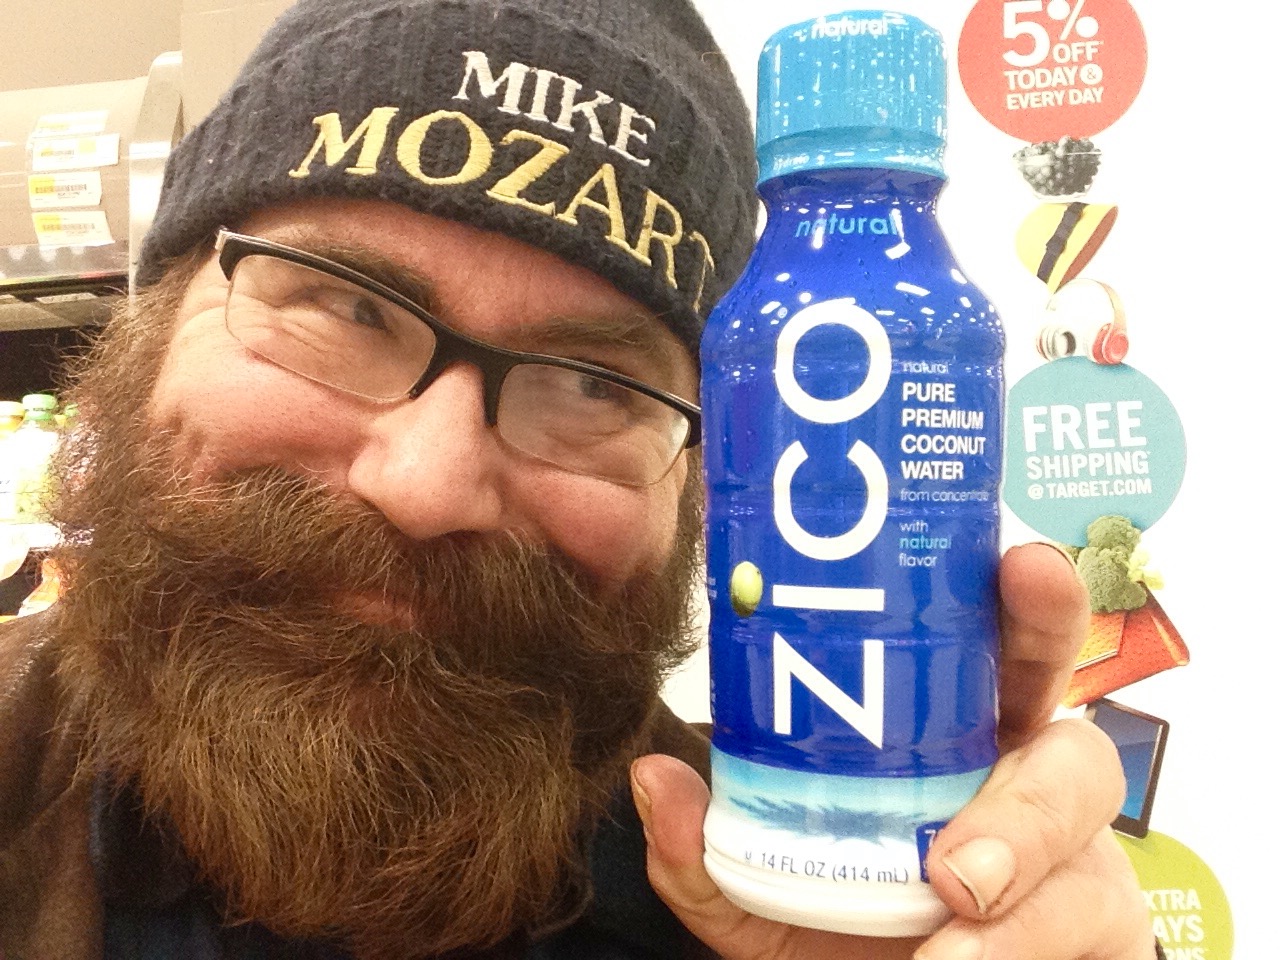 a man with glasses holds up a bottled blue drink